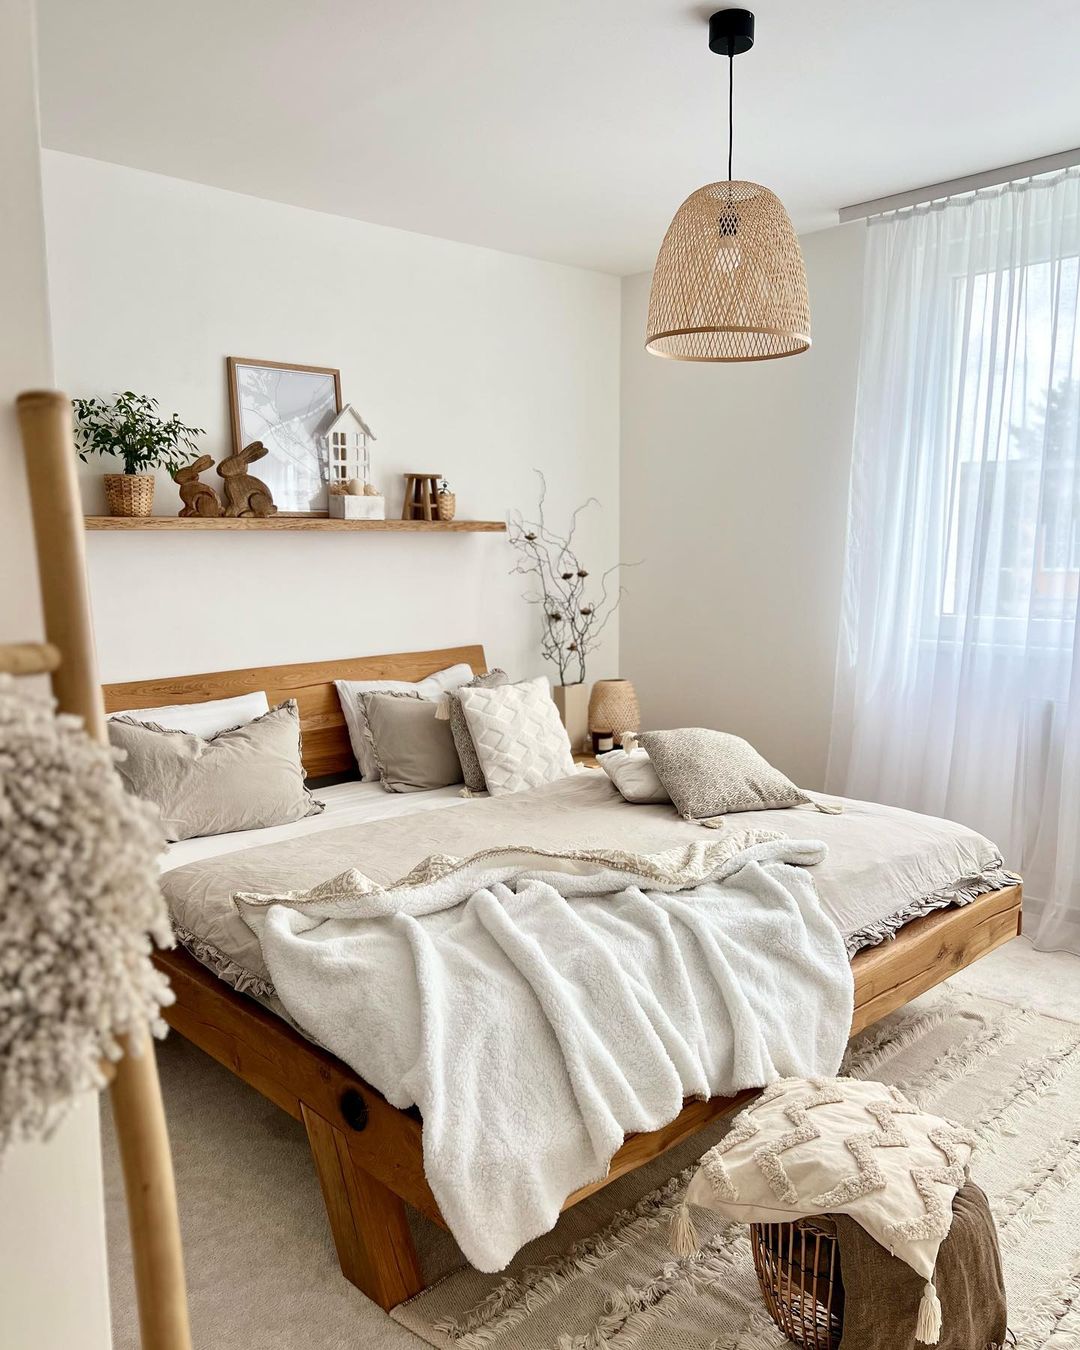 How to Use Natural Wood to Create a Cozy & Warm Scandinavian Bedroom